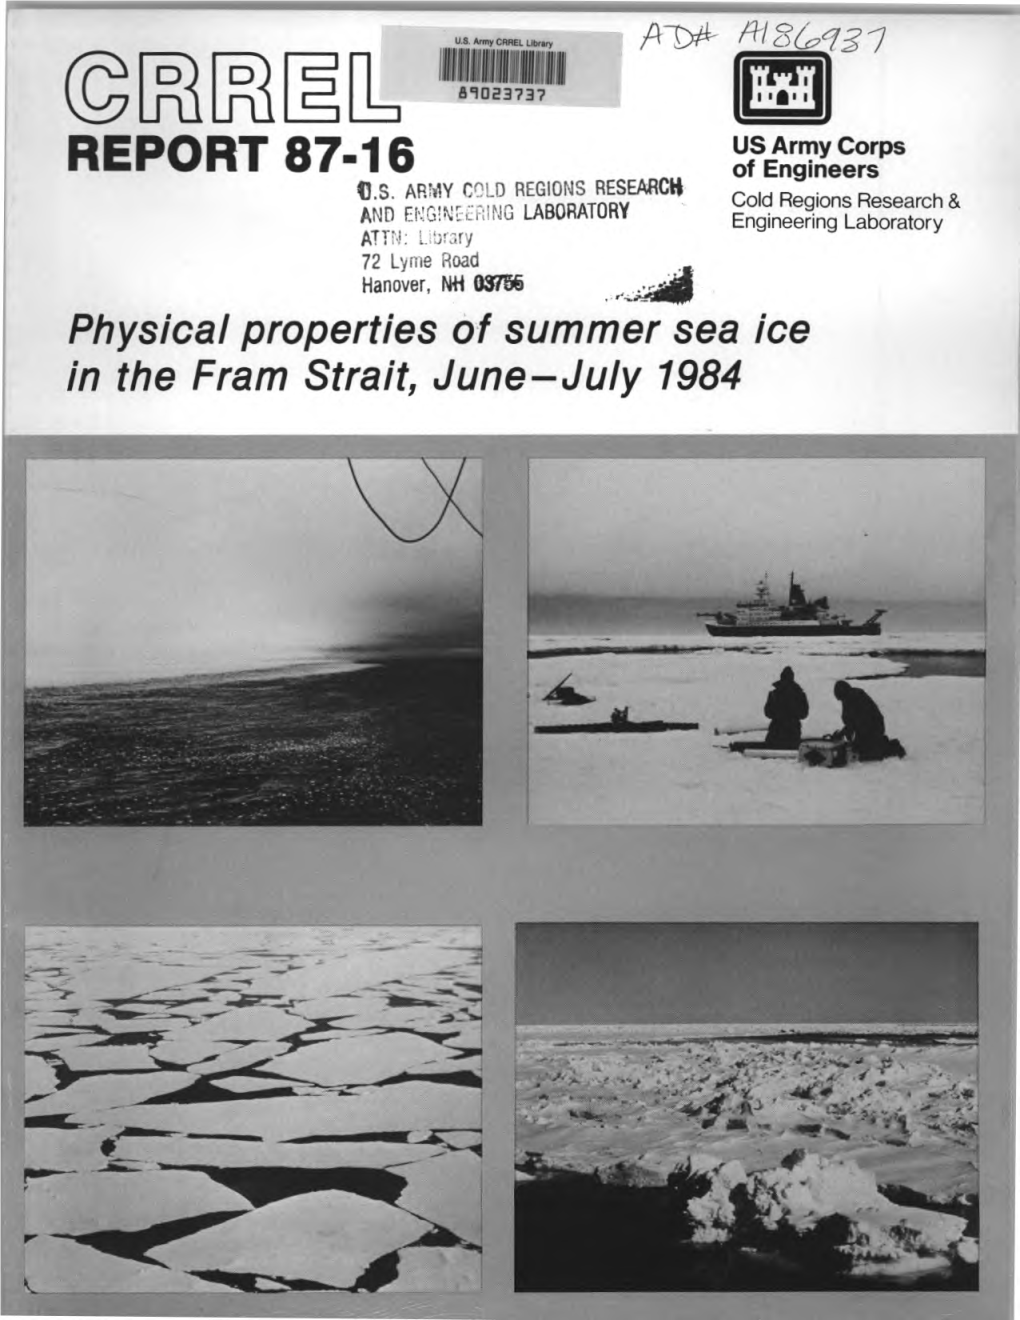 Physical Properties of Summer Sea Ice in the Fram Strait, June-July 1984